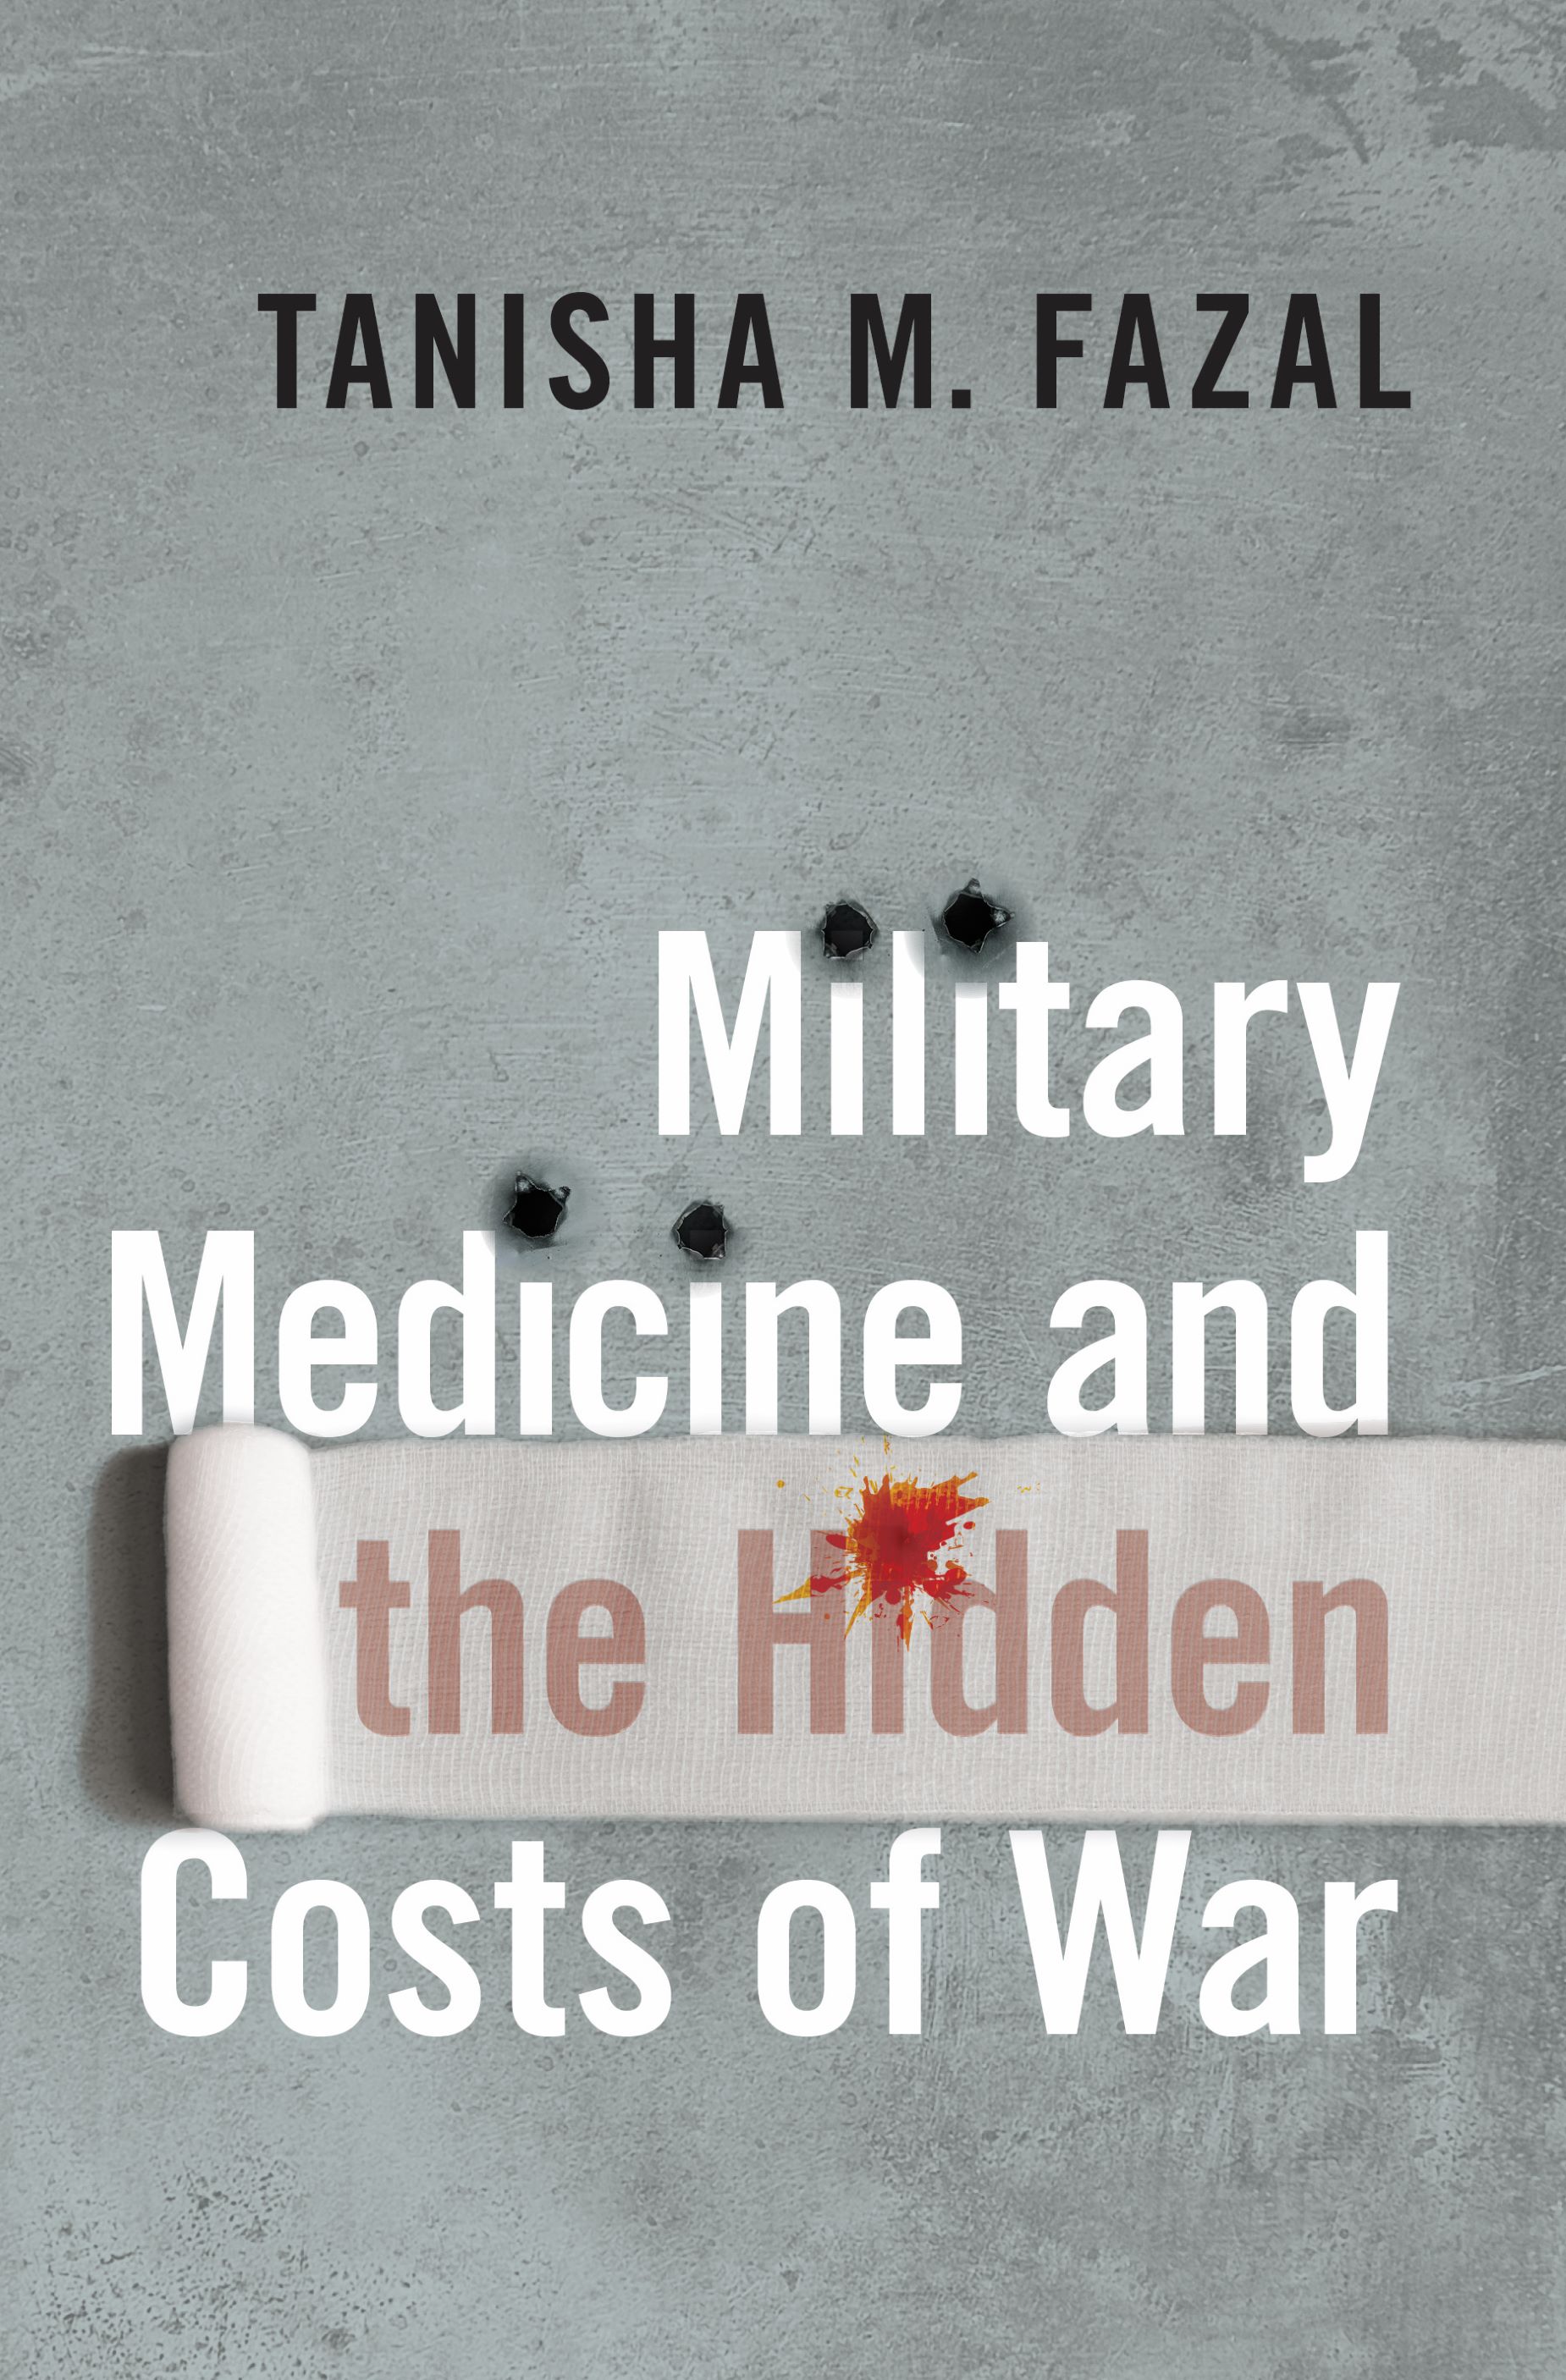 Cover of Tanisha Fazal's book "Military Medicine and the Hidden Costs of War"